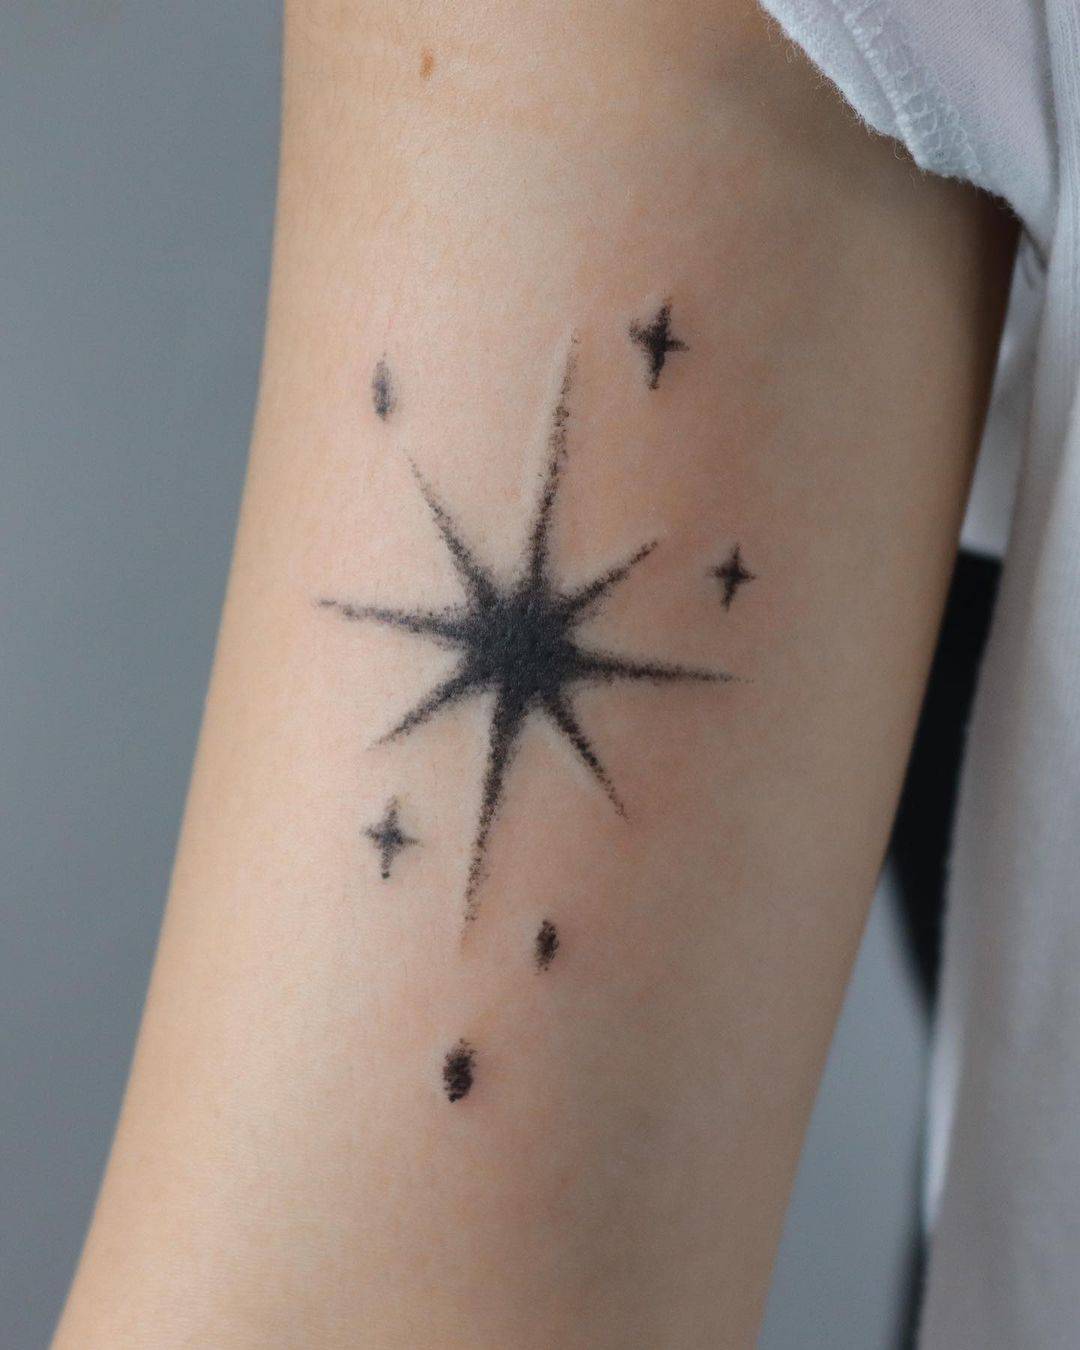 41 Amazing Star Tattoos and Ideas for Women - StayGlam